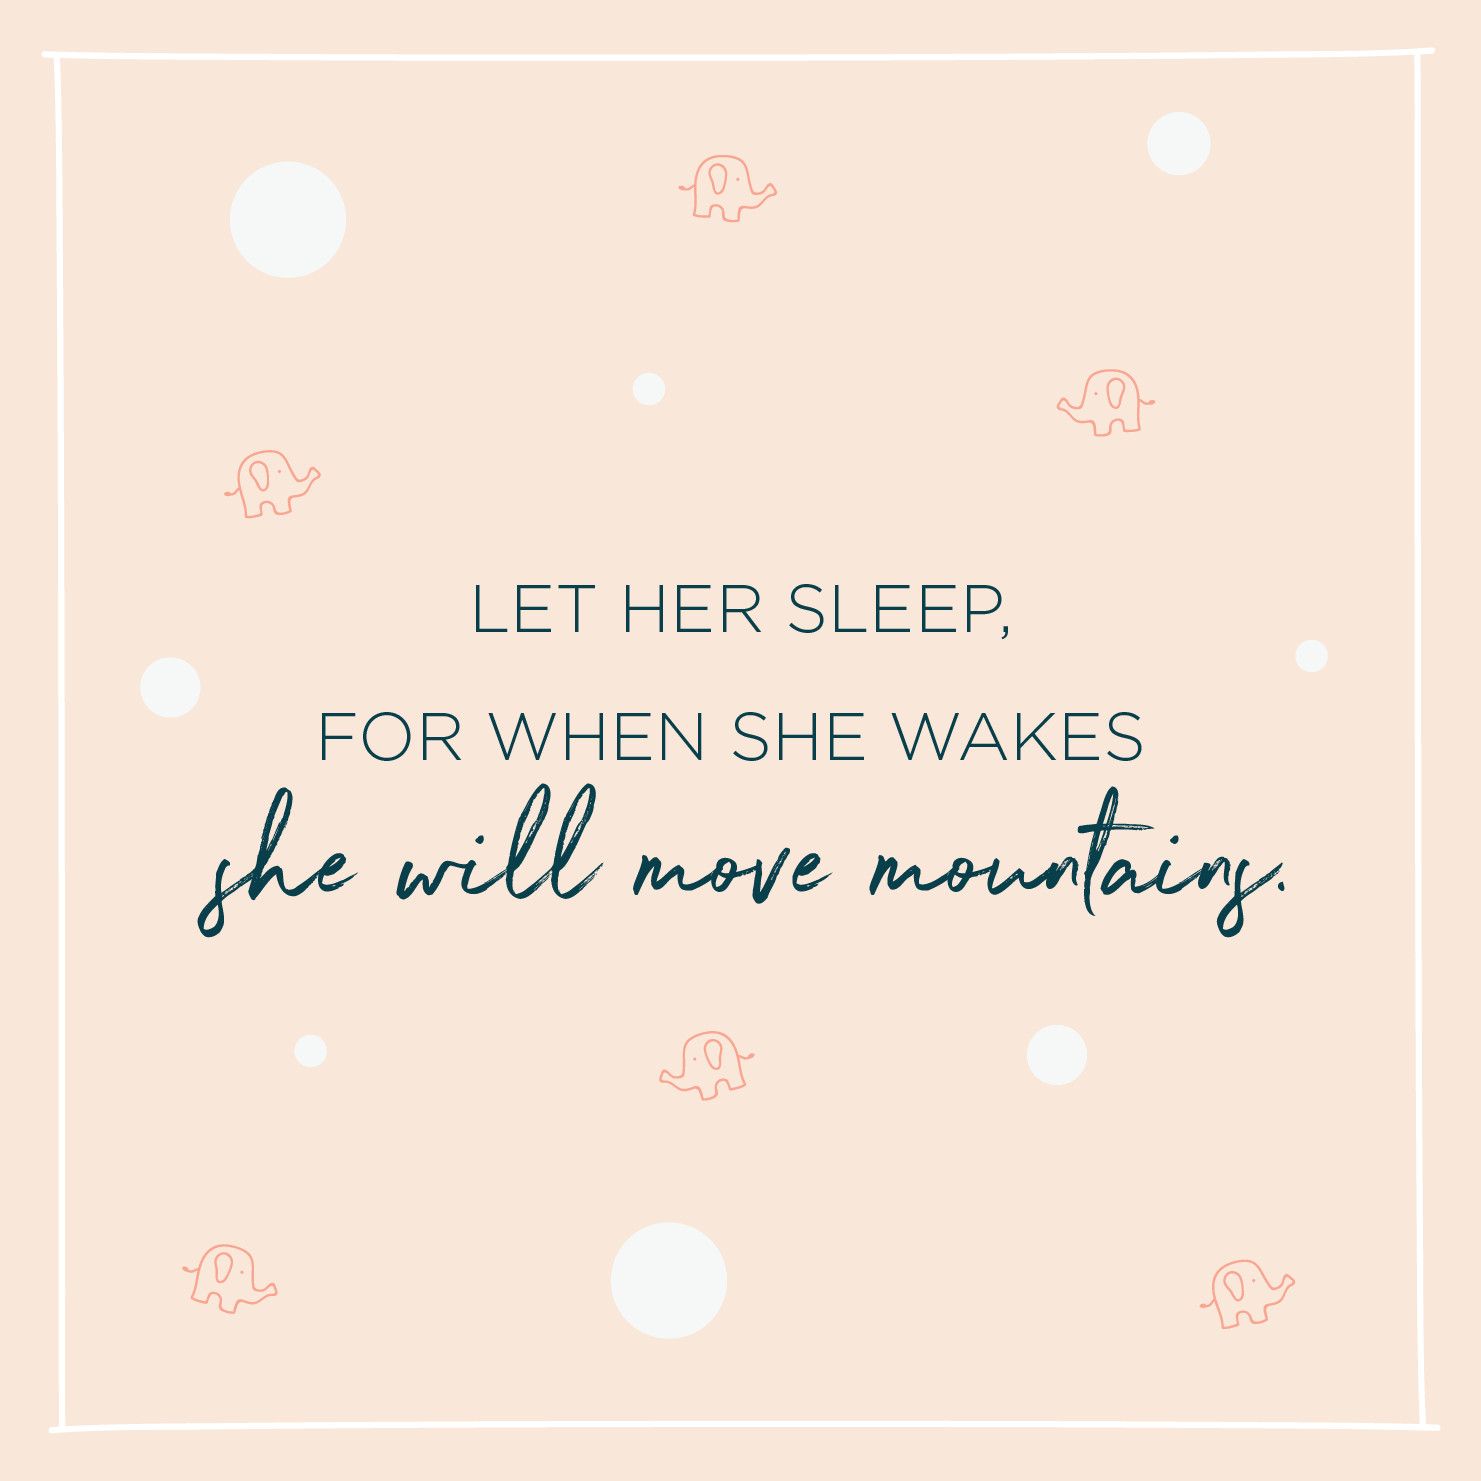 Baby Girl Inspirational Quotes
 84 Inspirational Baby Quotes and Sayings